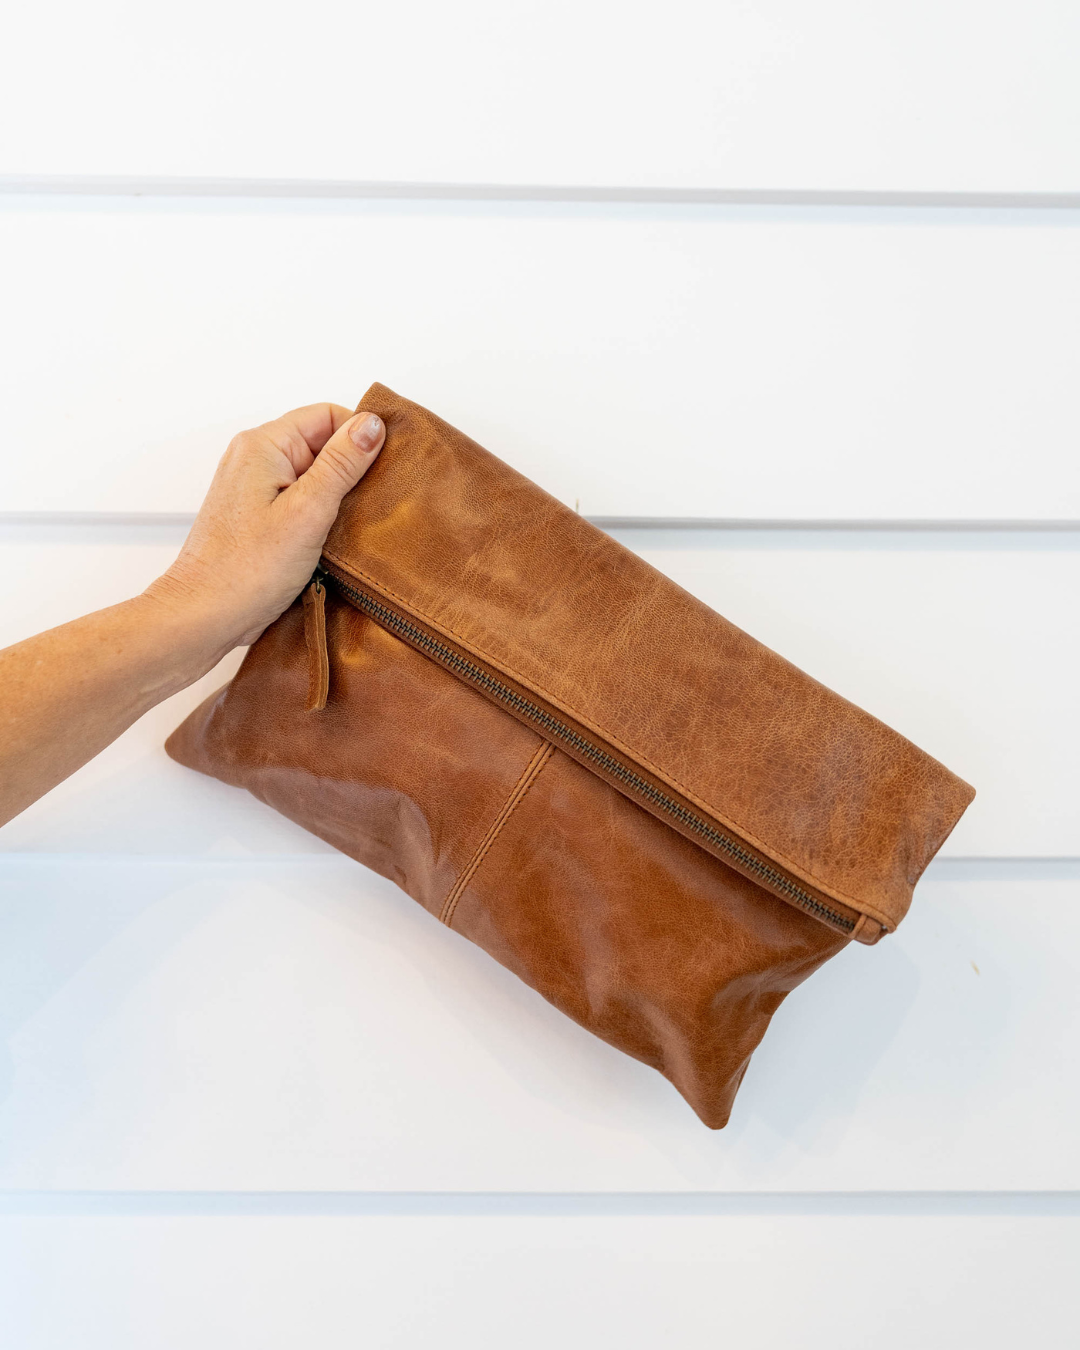 Foldover Clutch - BARE Leather